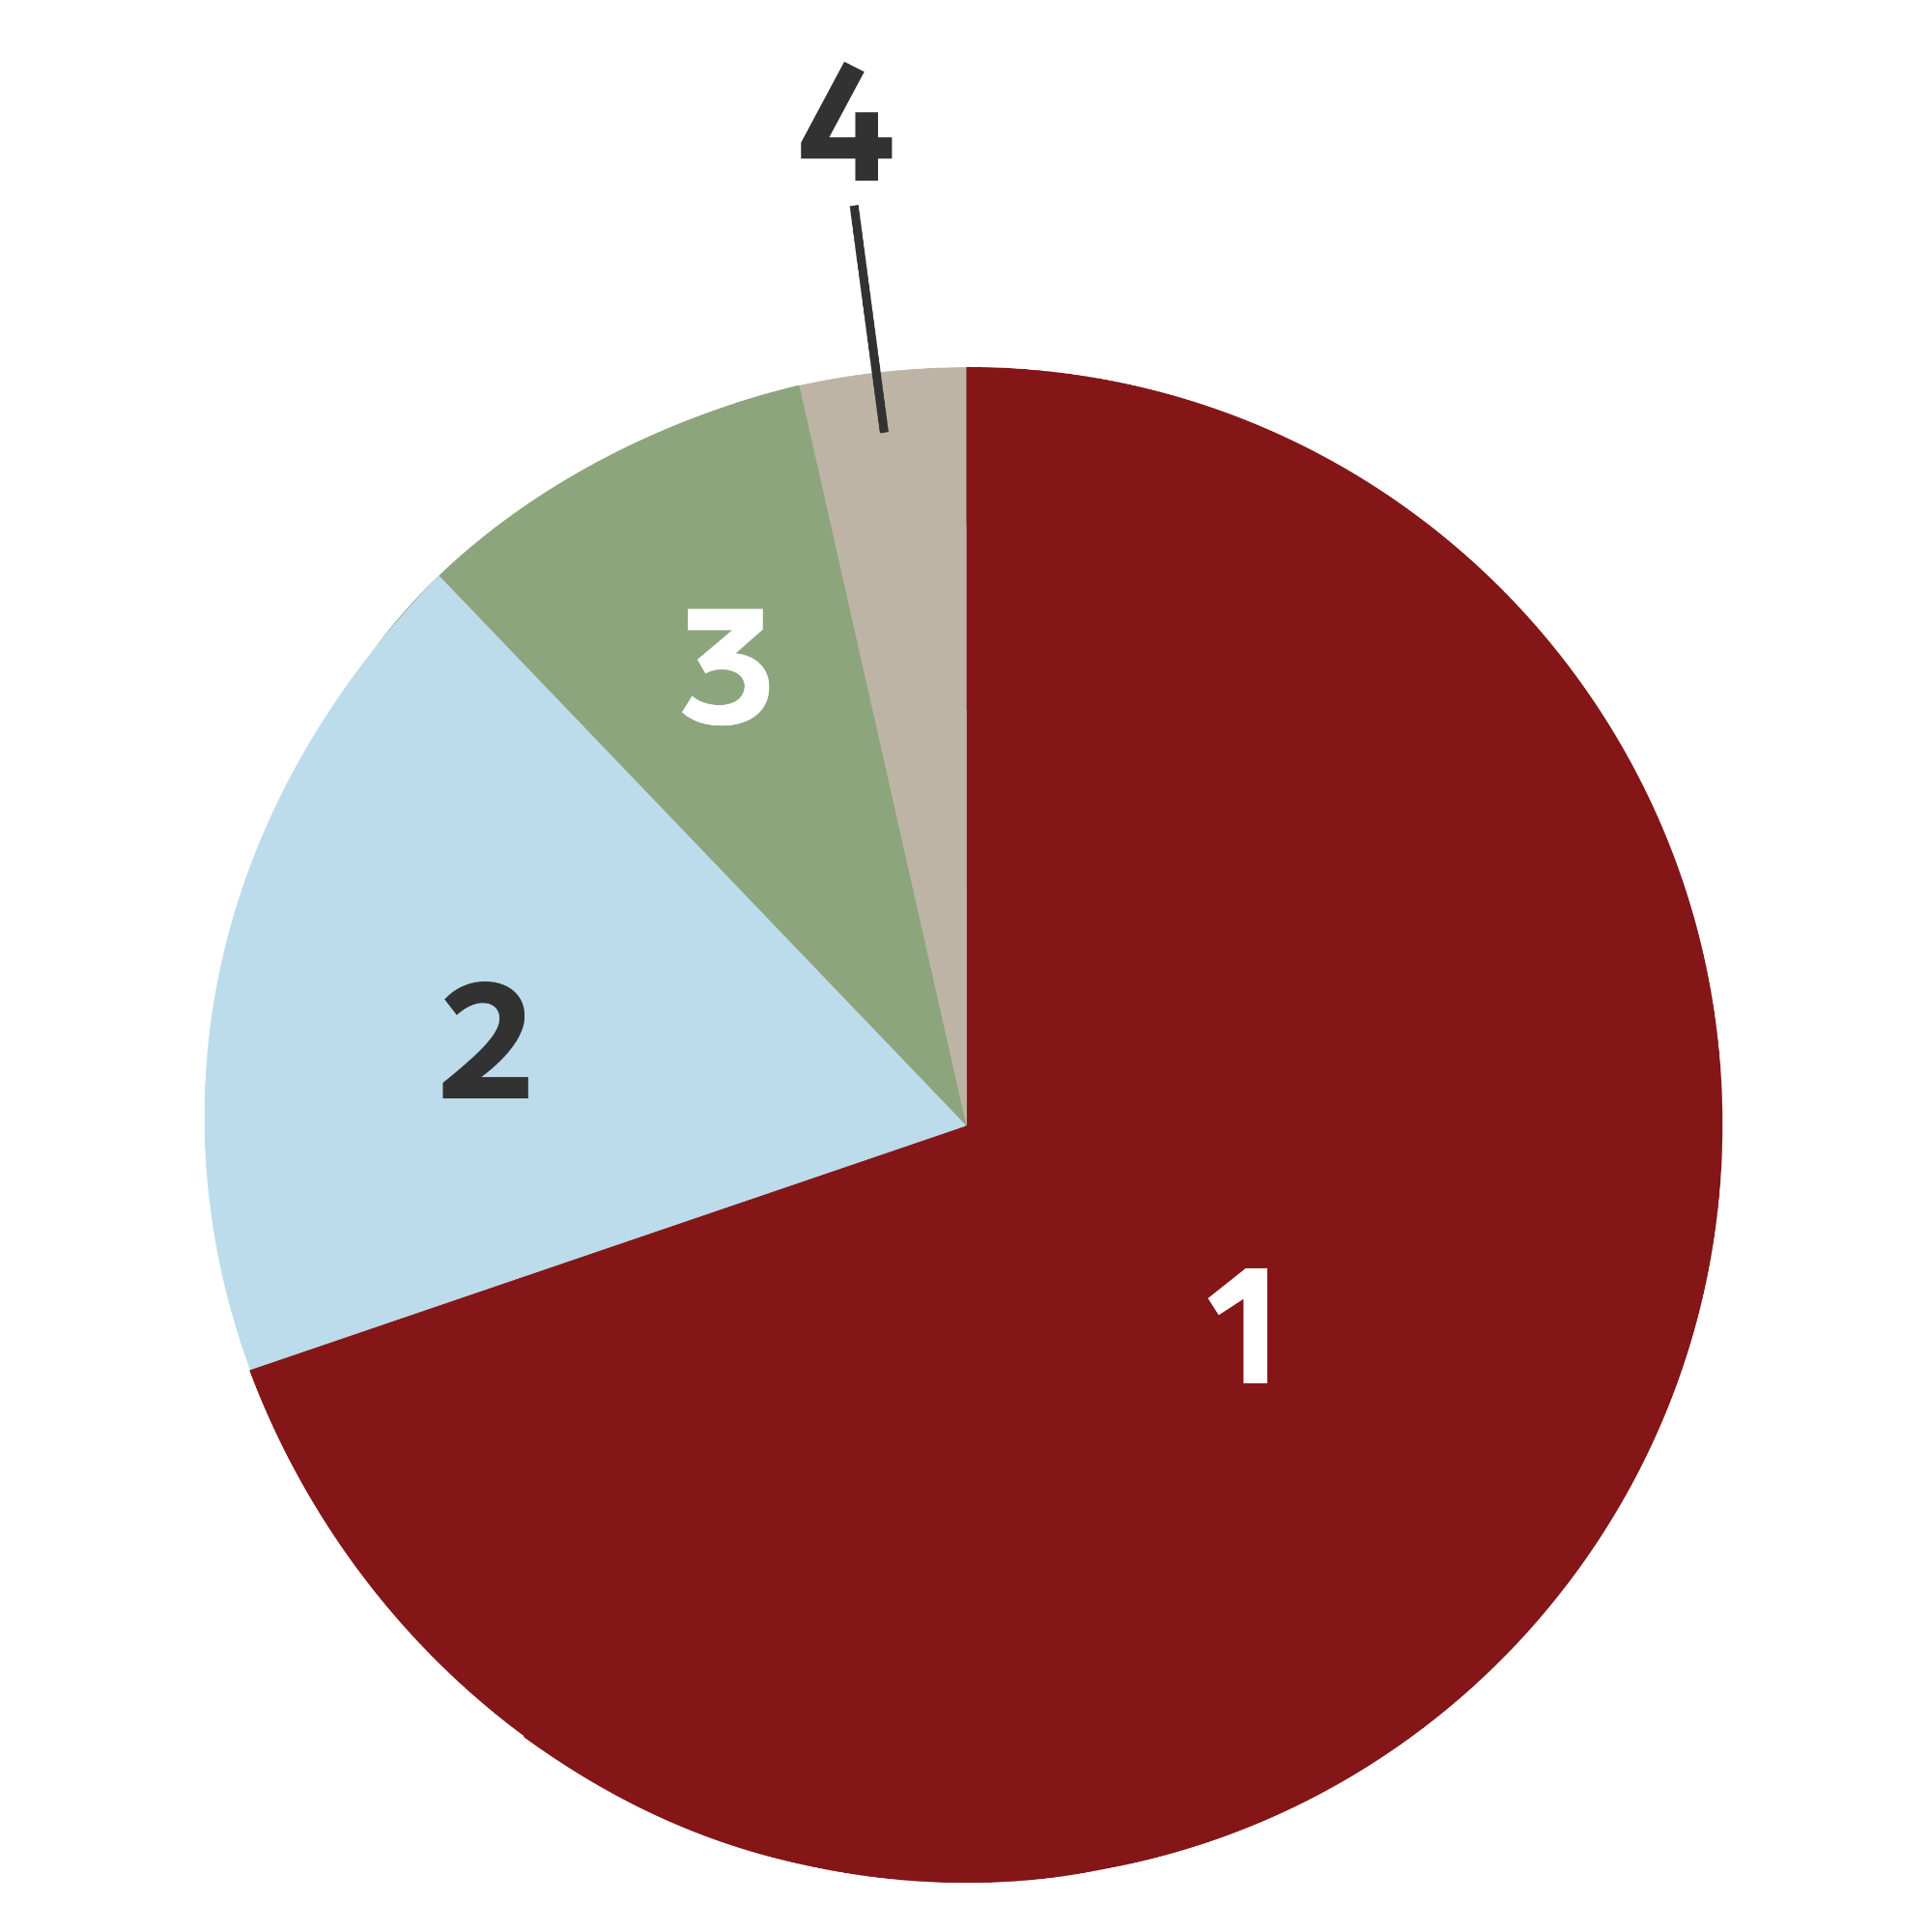 Pie chart broken into four colored sections. Starting with number one, the largest section, and going clockwise is a crimson section with the number one, a sky colored section with the number two, a leaf colored section with the number three, and a sand colored section with the number four.